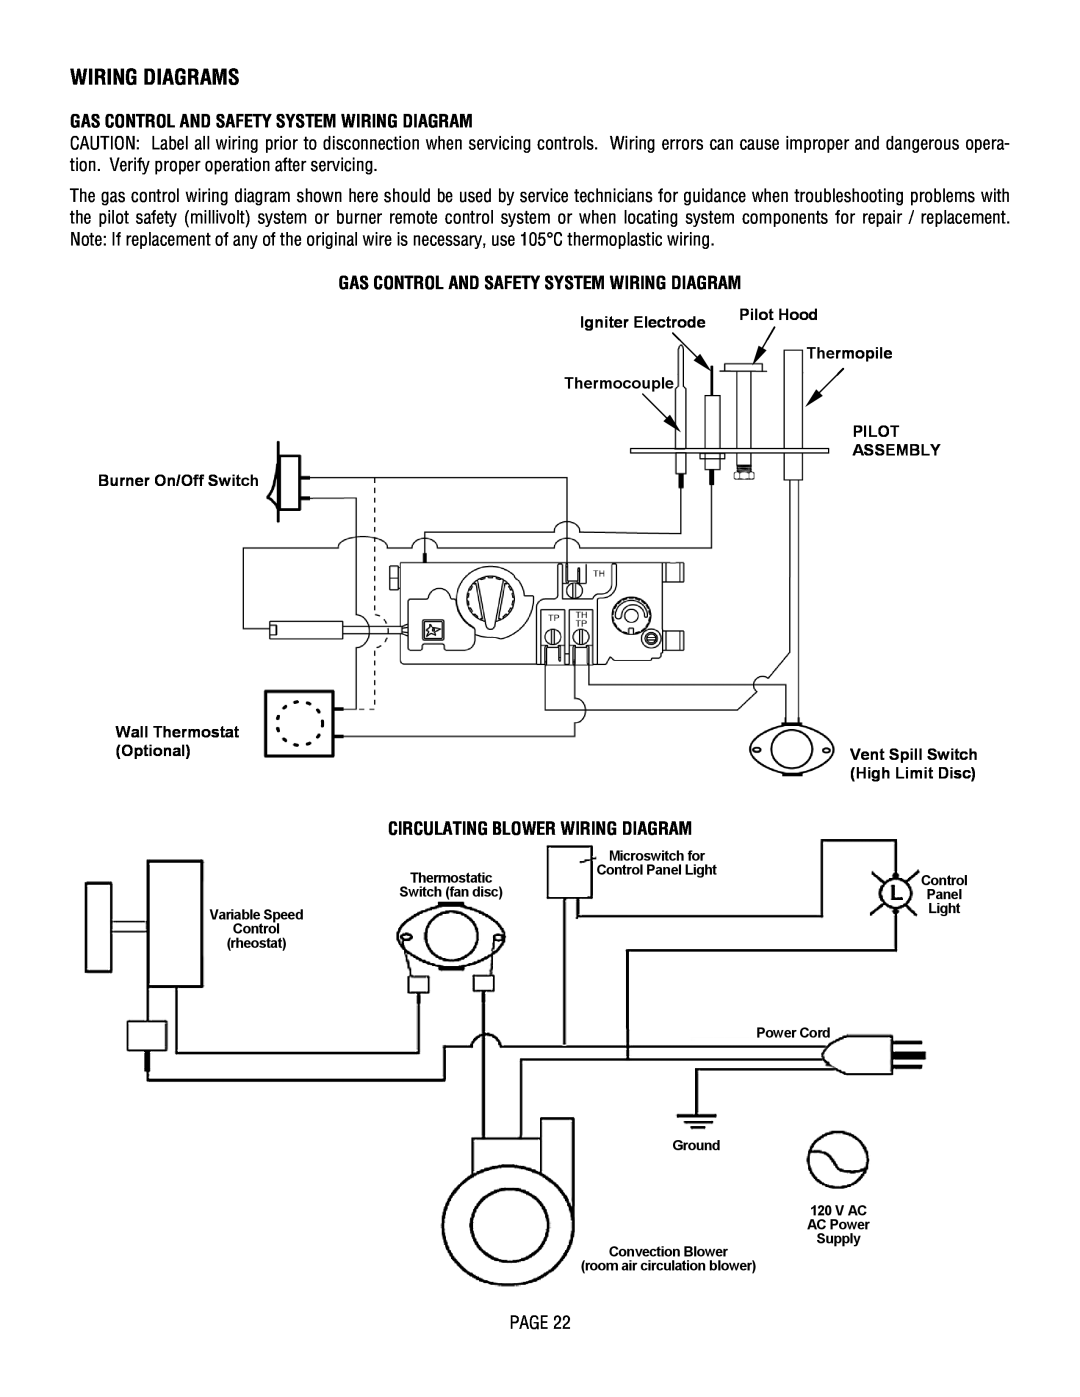 Lennox Hearth L30 DVF-2 Wiring Diagrams, Gas Control And Safety System Wiring Diagram, Circulating Blower Wiring Diagram 